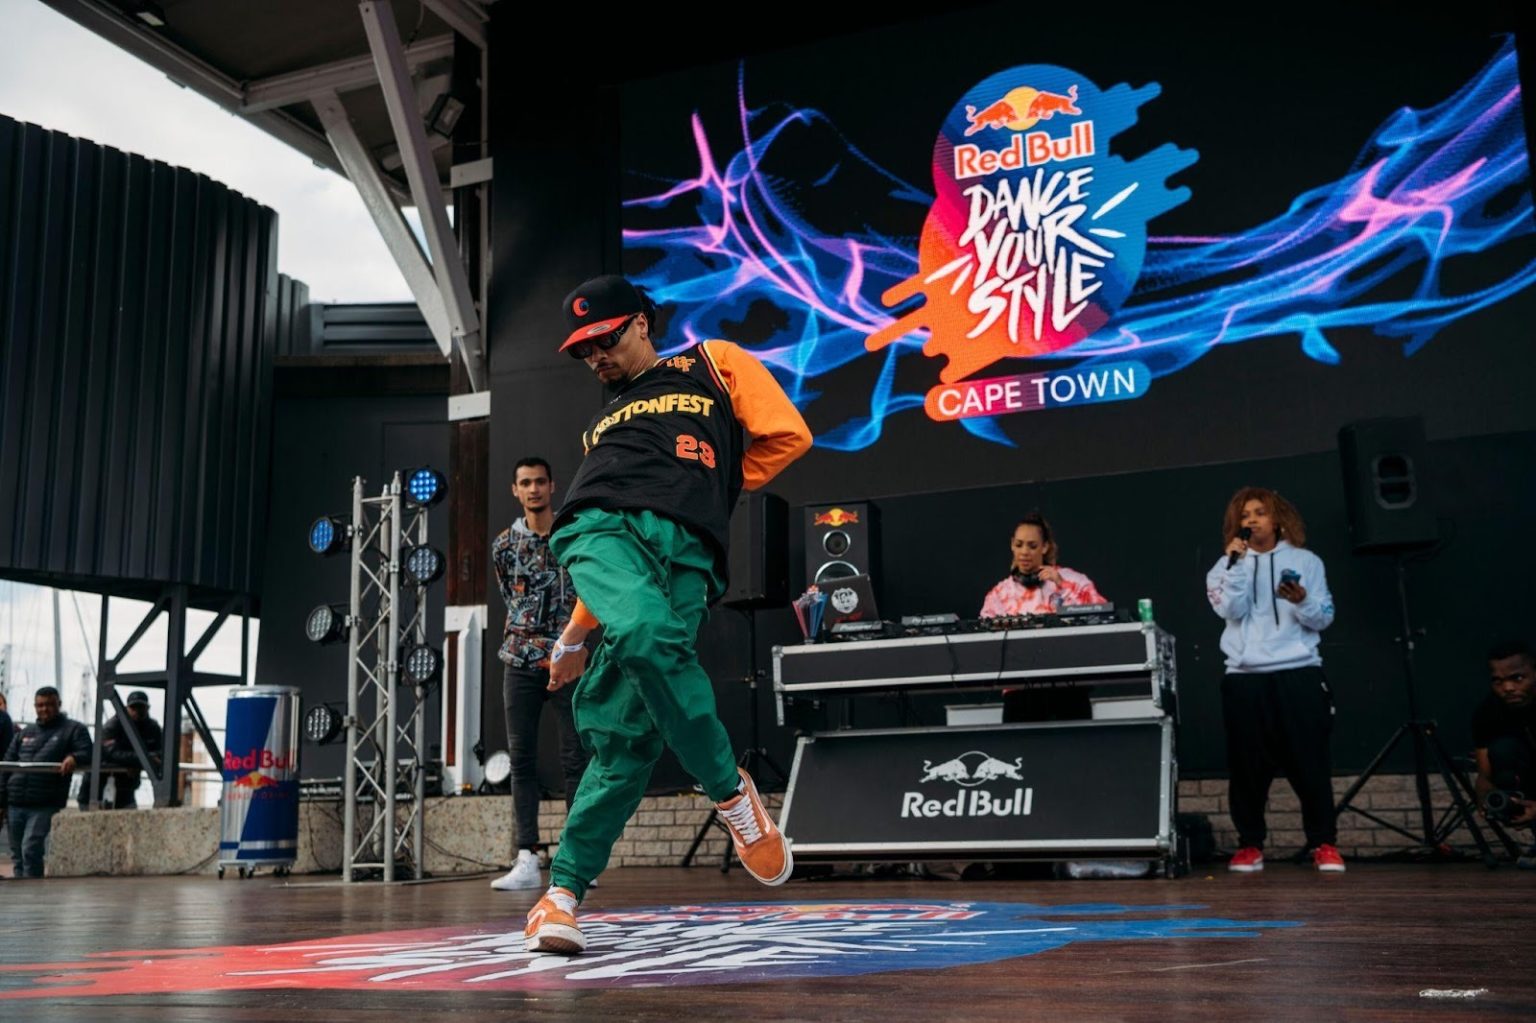 RED BULL ANNOUNCES TOP 16 DANCERS HEADING TO NATIONAL FINAL - Hypress Live